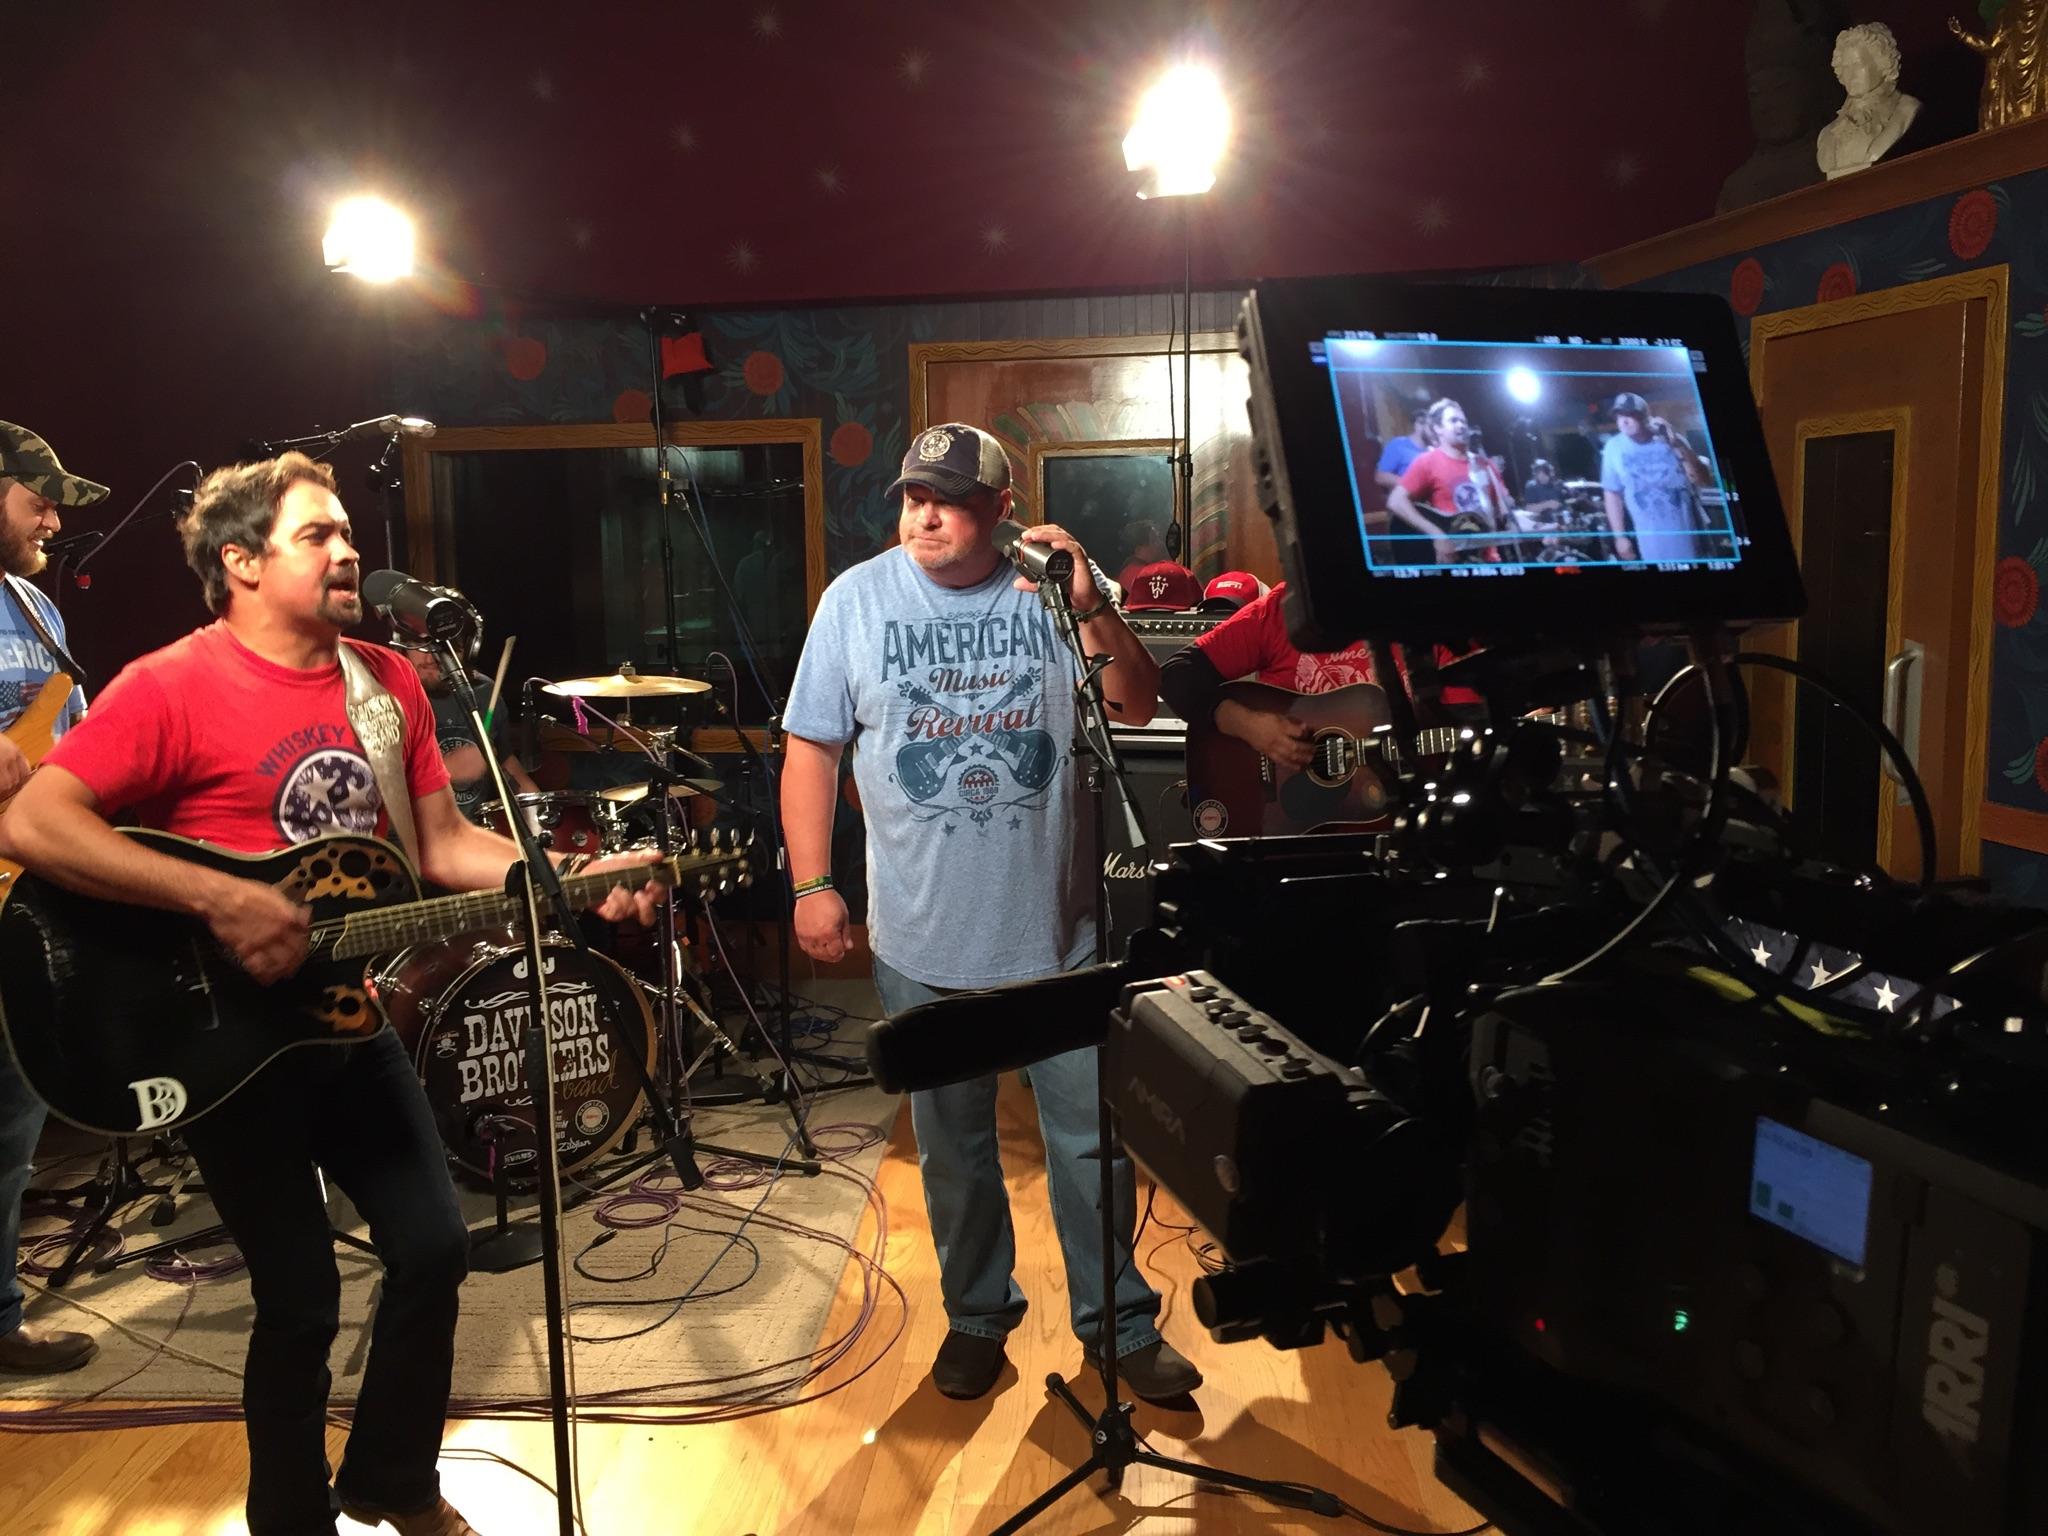 John Kruk joined a country band to record music for ESPN